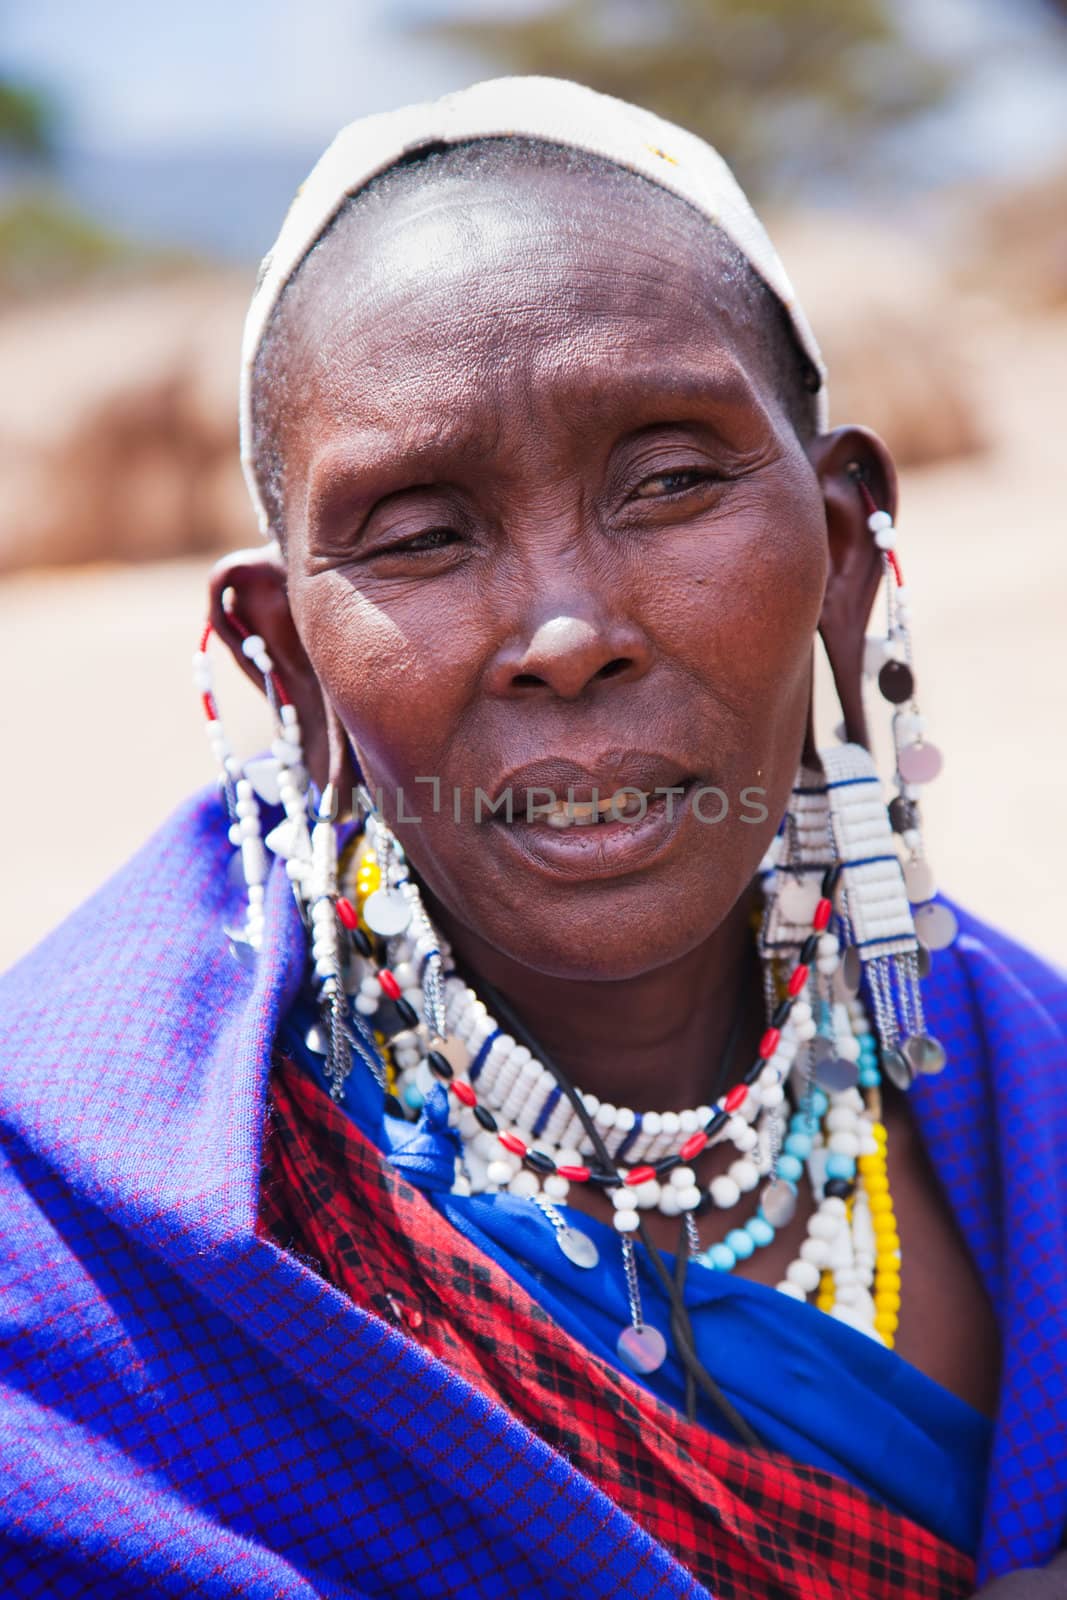 Maasai village, TANZANIA, AFRICA - DECEMBER 11: Maasai woman portrait in traditional clothes on December 11, 2012 in Ngorongoro Tanzania. Maasai people are among the best known of African ethnic groups located in Kenya and northern Tanzania.